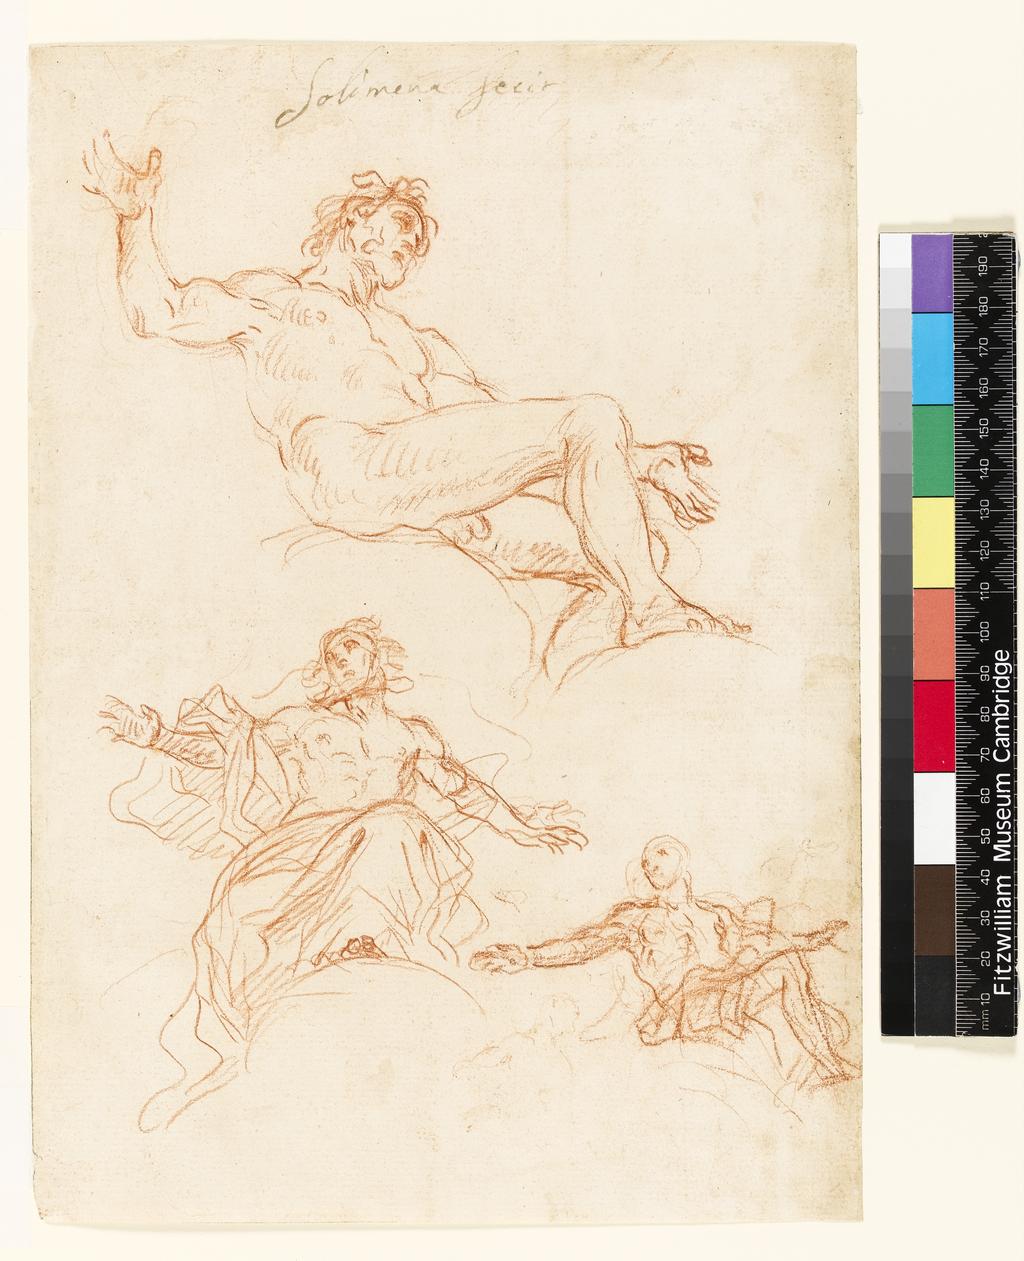 An image of Title/s: Study sheet (recto title) Maker/s: Solimena, Francesco (draughtsman) [ULAN info: Italian artist, 1657-1747]Technique Description: red chalk on paper Dimensions: height: 290 mm, width: 205 mm